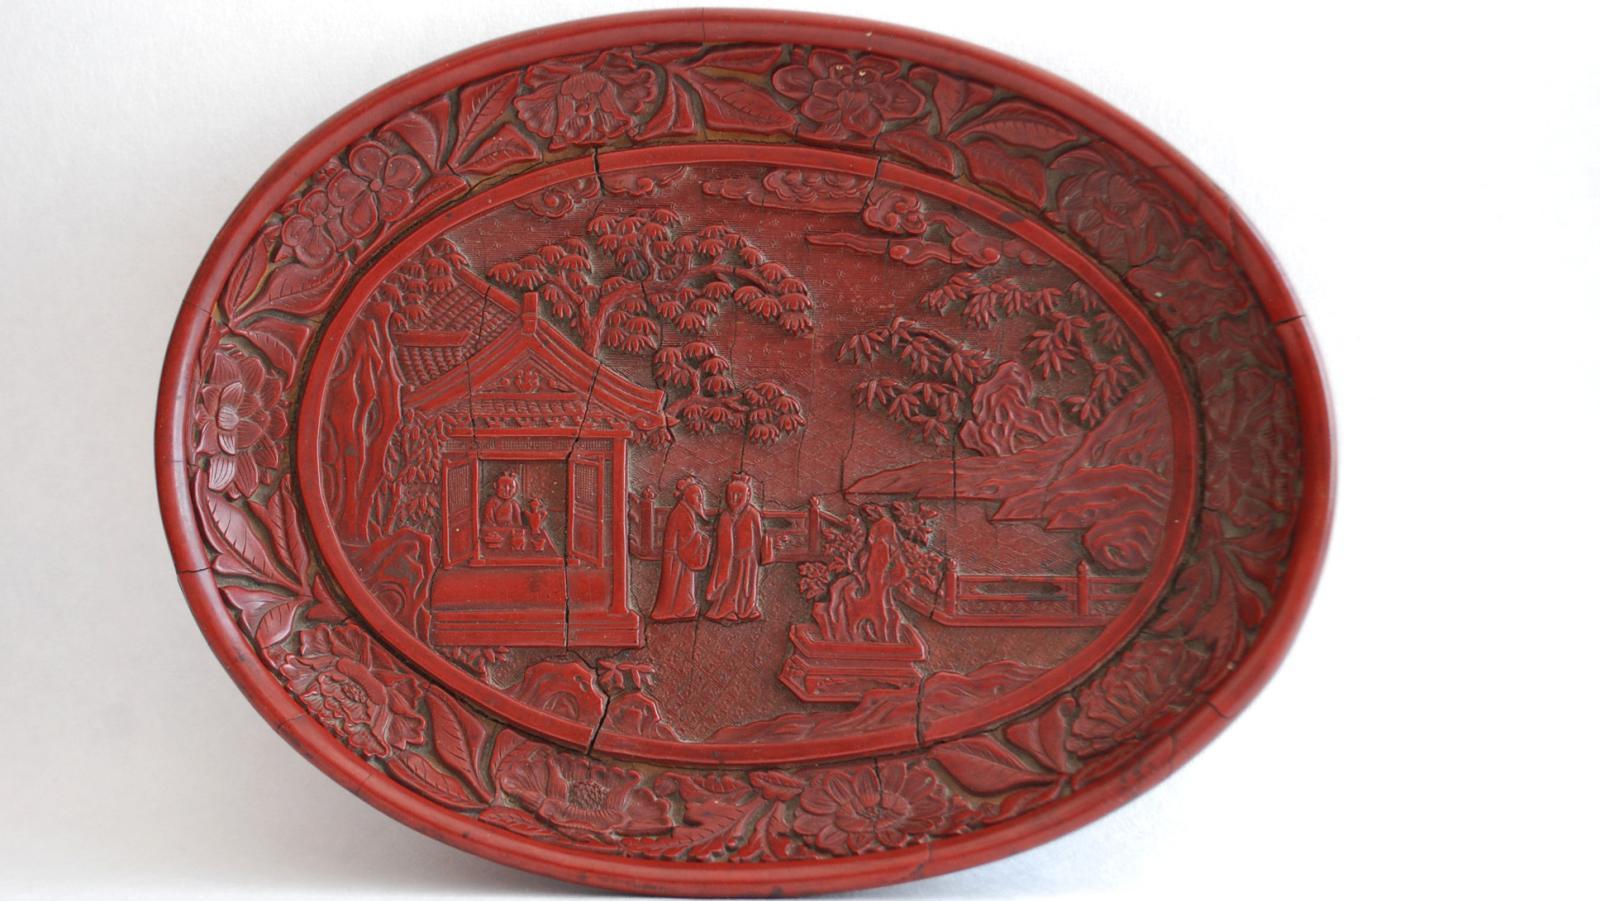 China, Ming Yongle period (1402-1424), oval platter in carved, marked “Da Ming Yong... A Precious Ming Dynasty Lacquer 